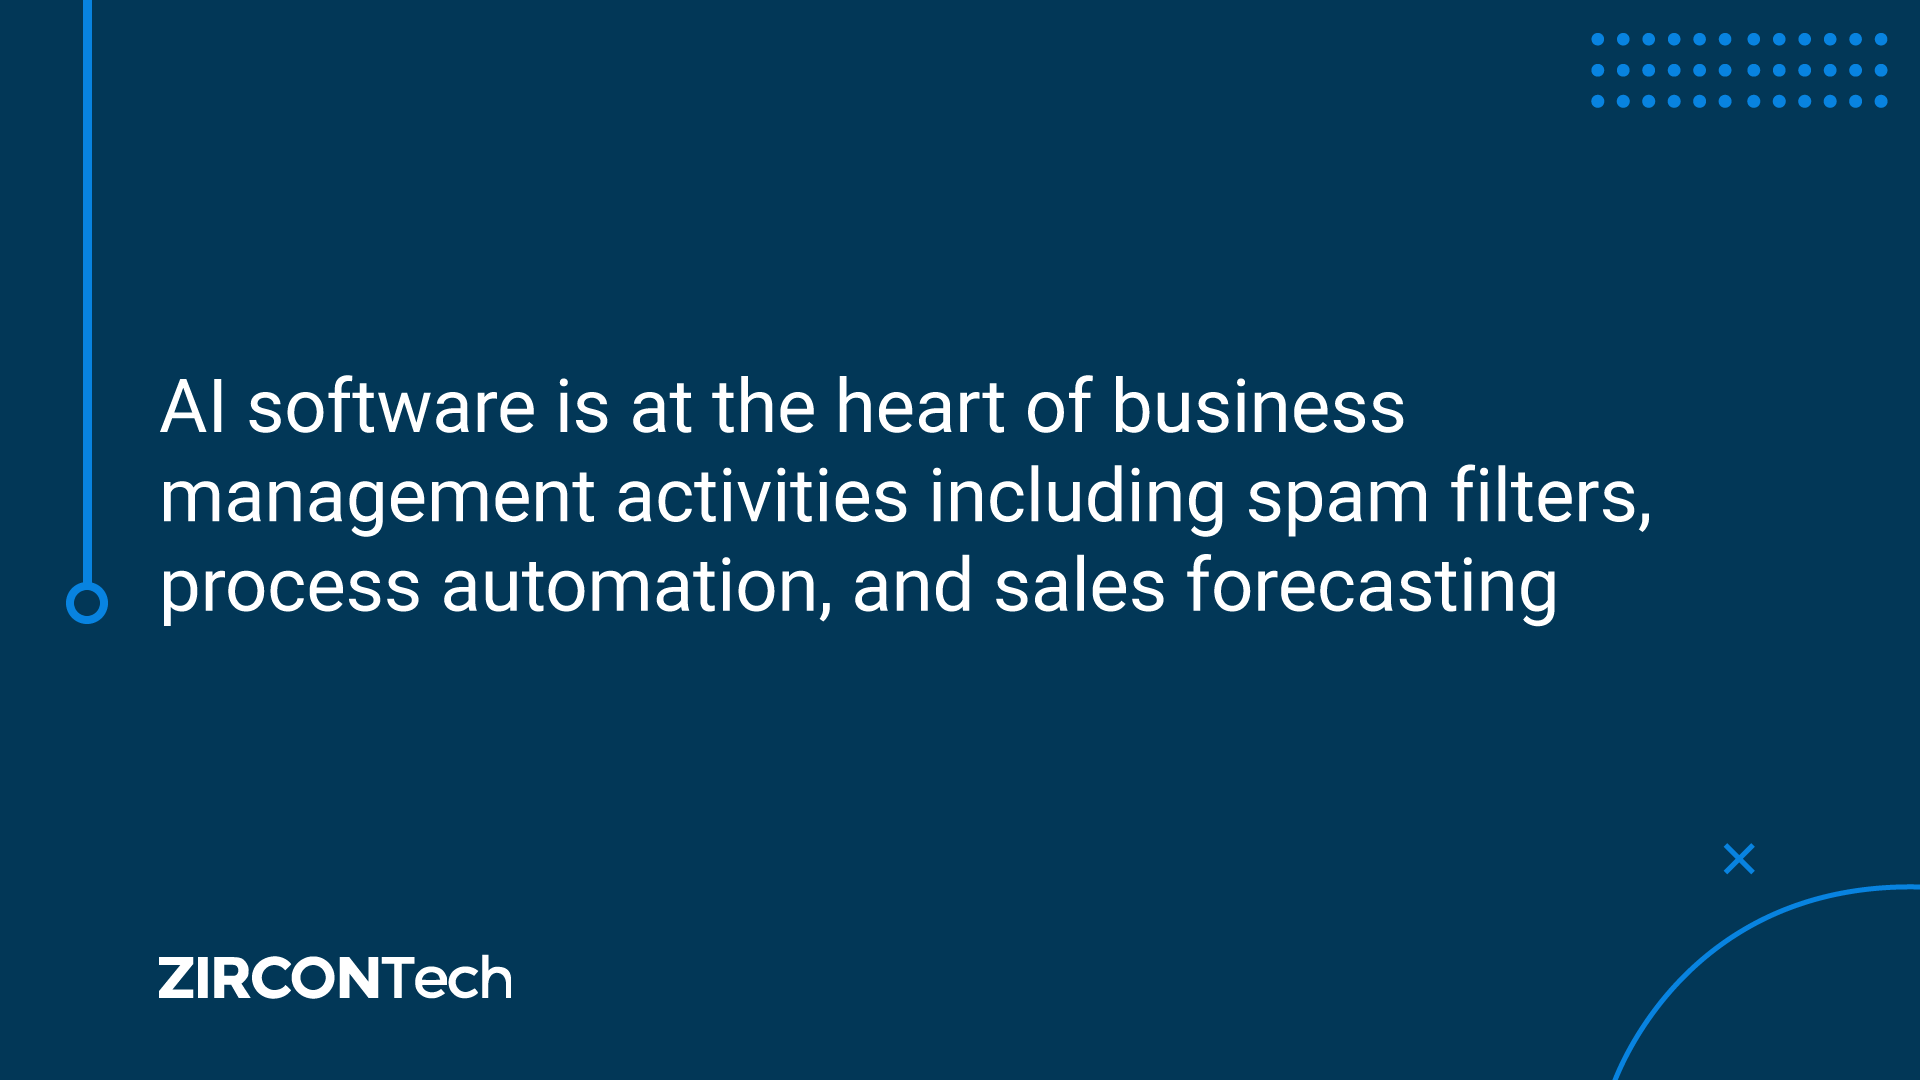 AI software is at the heart of business management activities like spam filters, process automation and sales forecasting